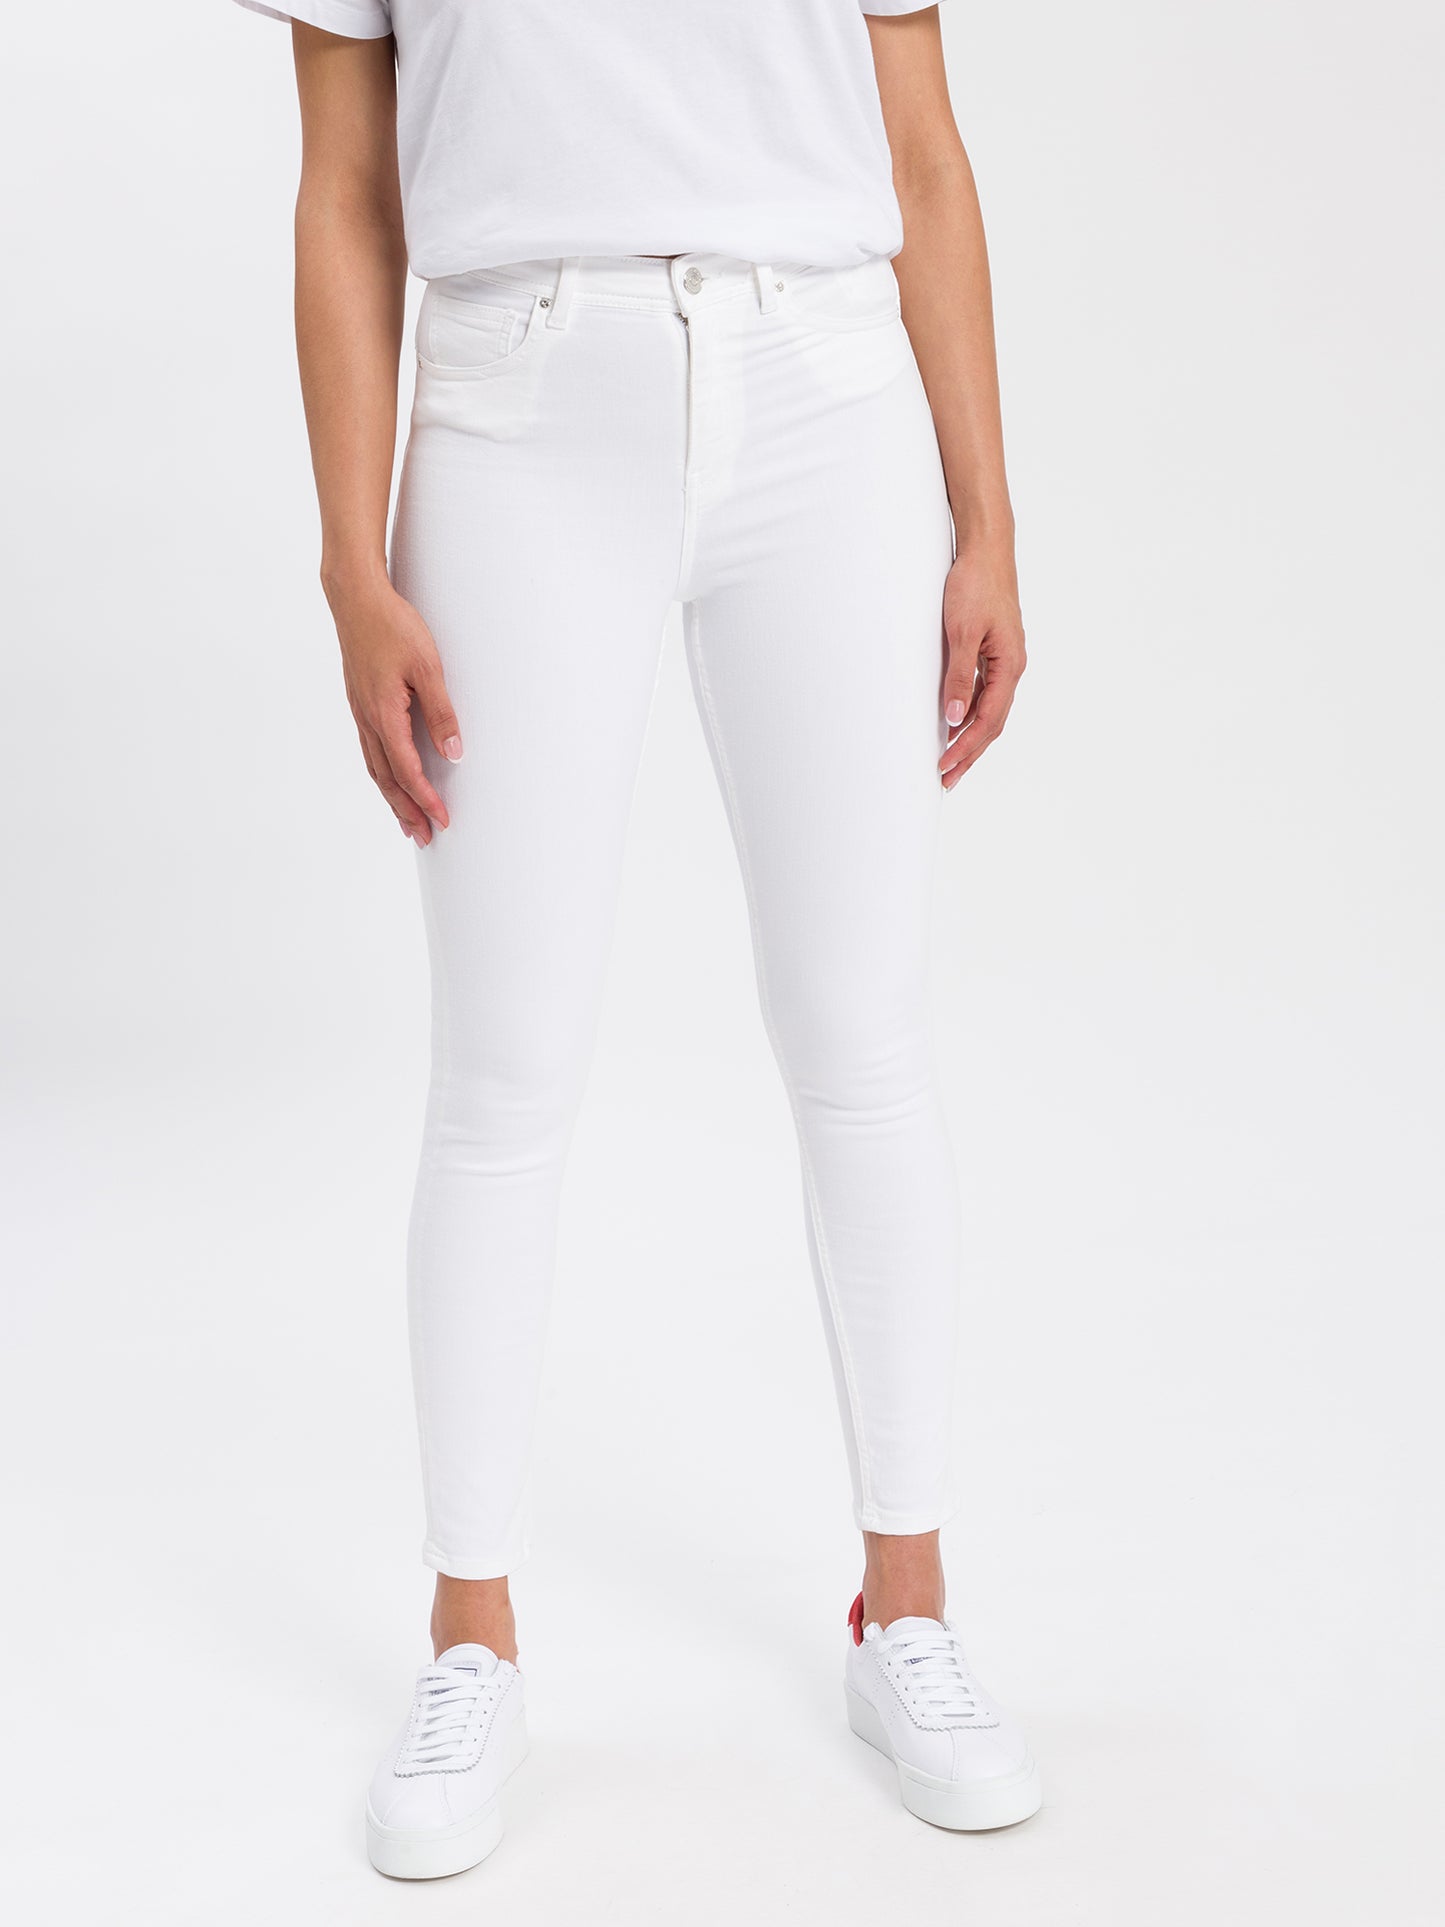 Judy Damen Jeans Super Skinny Fit High Waist Ankle Lenght weiß